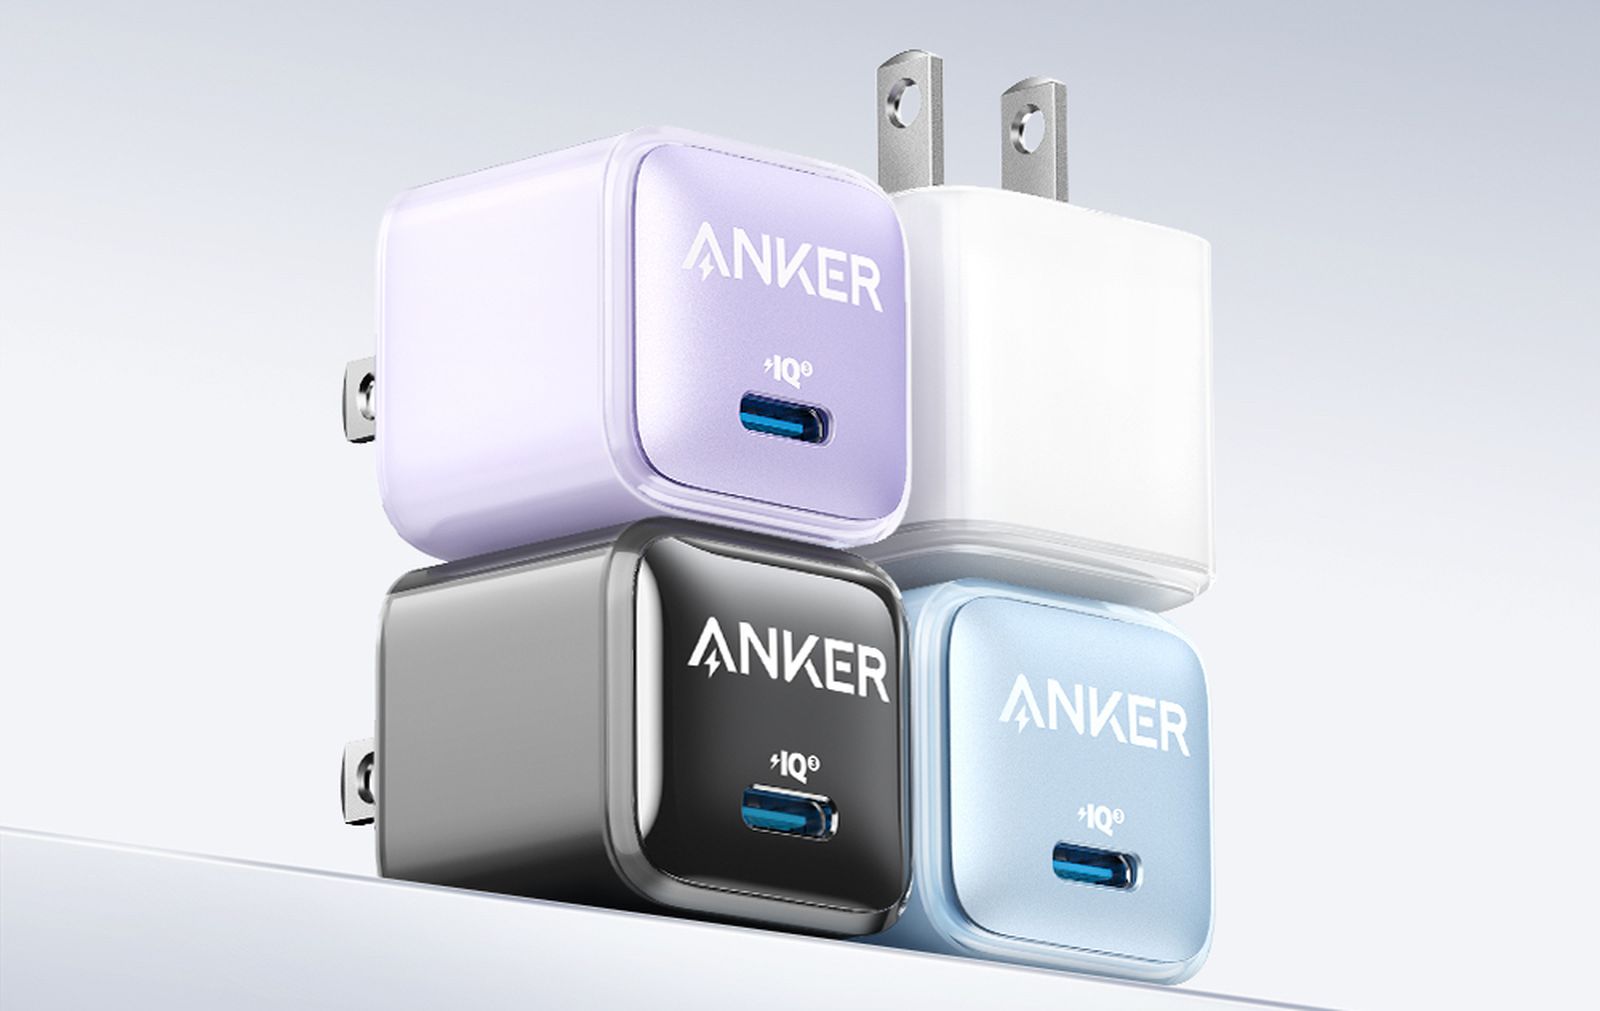 Anker Refreshes Its 20W Adapter Lineup With Colorful Anker Nano Pro